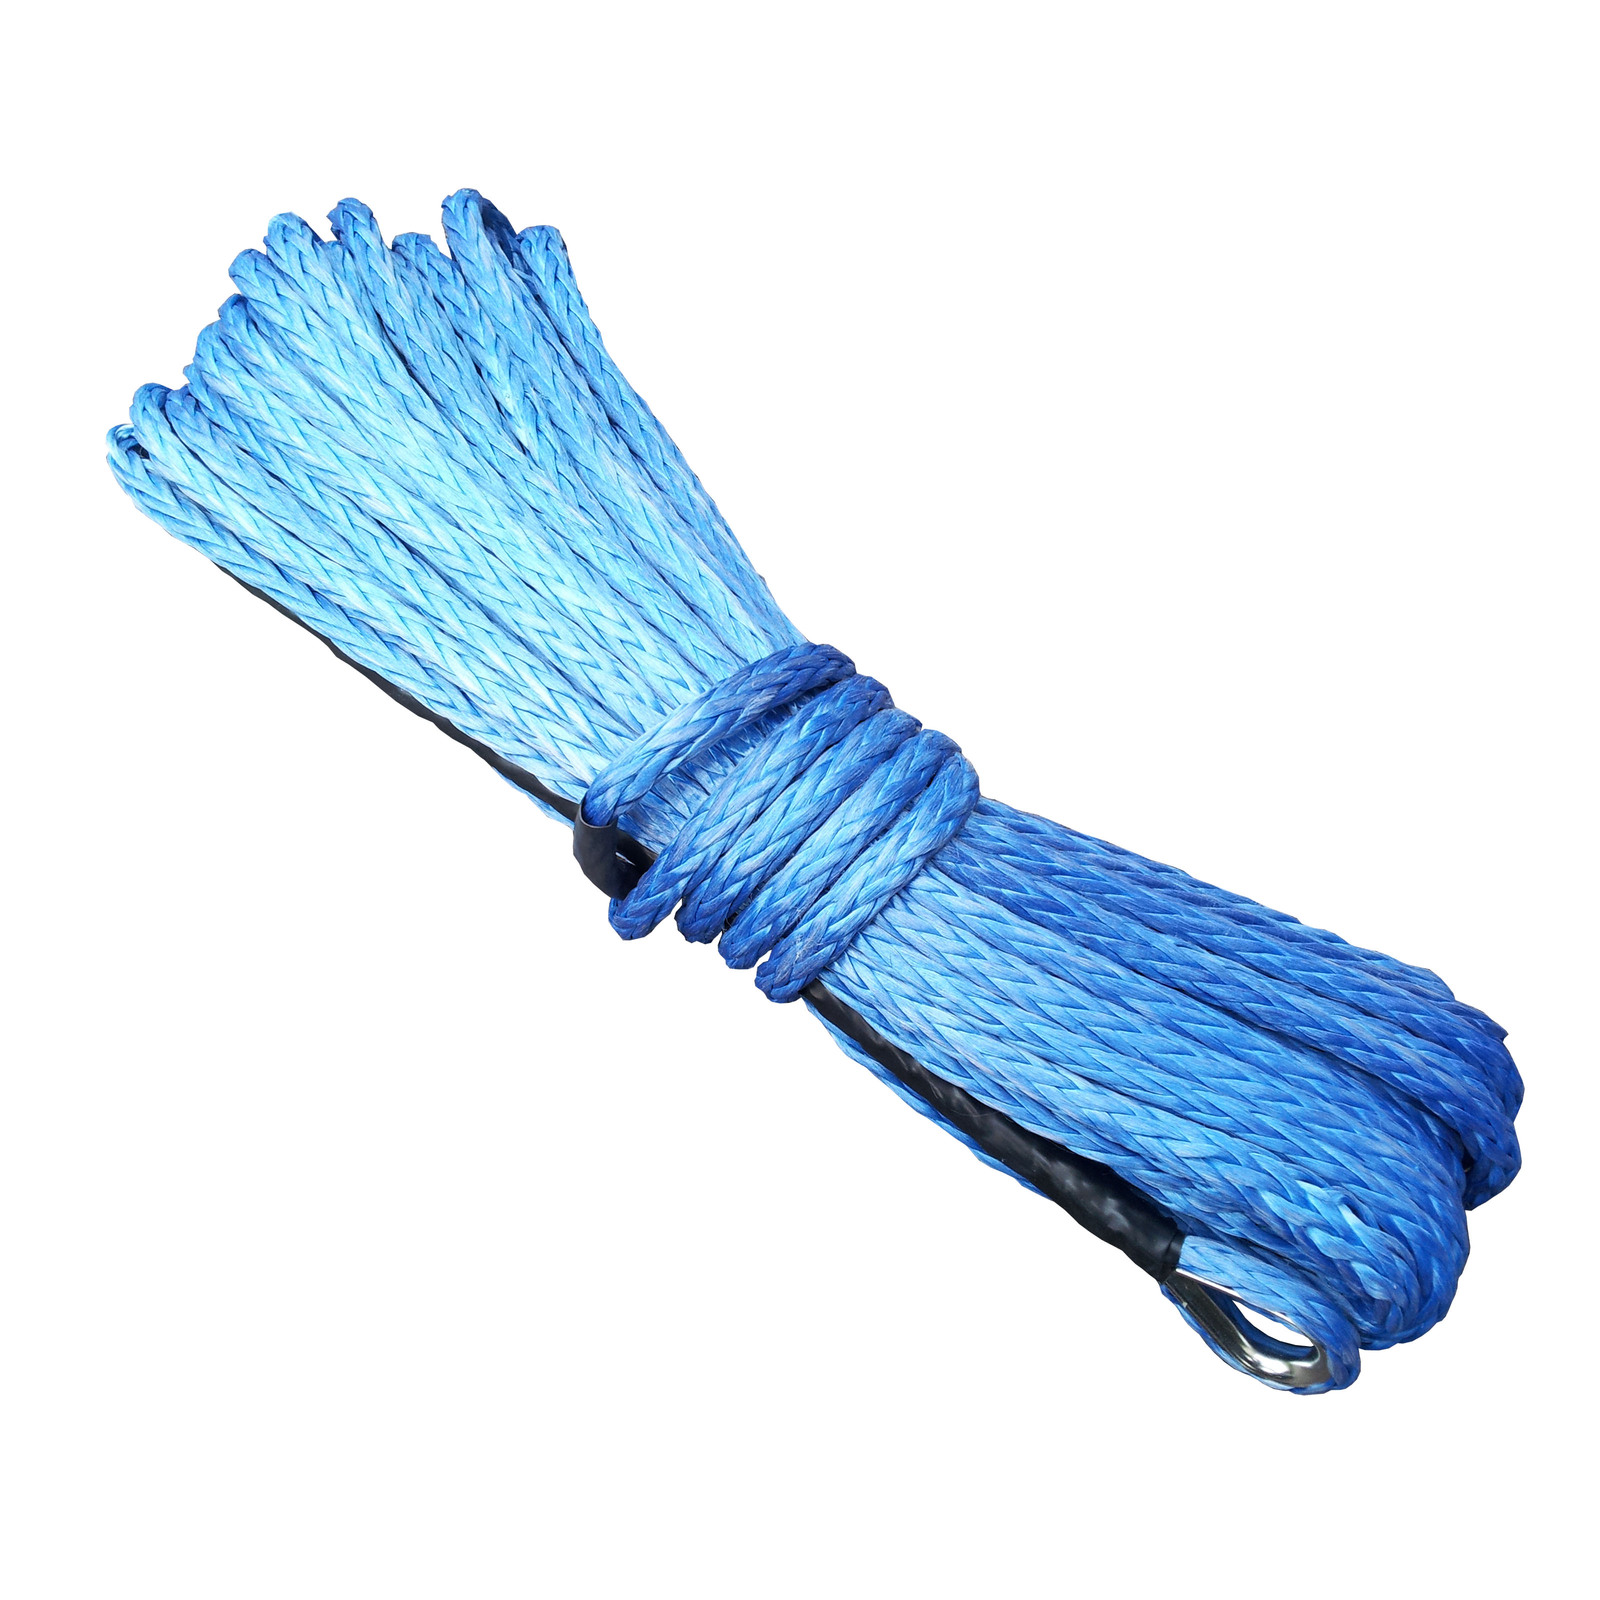 Runva Synthetic Winch Rope - 15M x 6MM (BLUE)